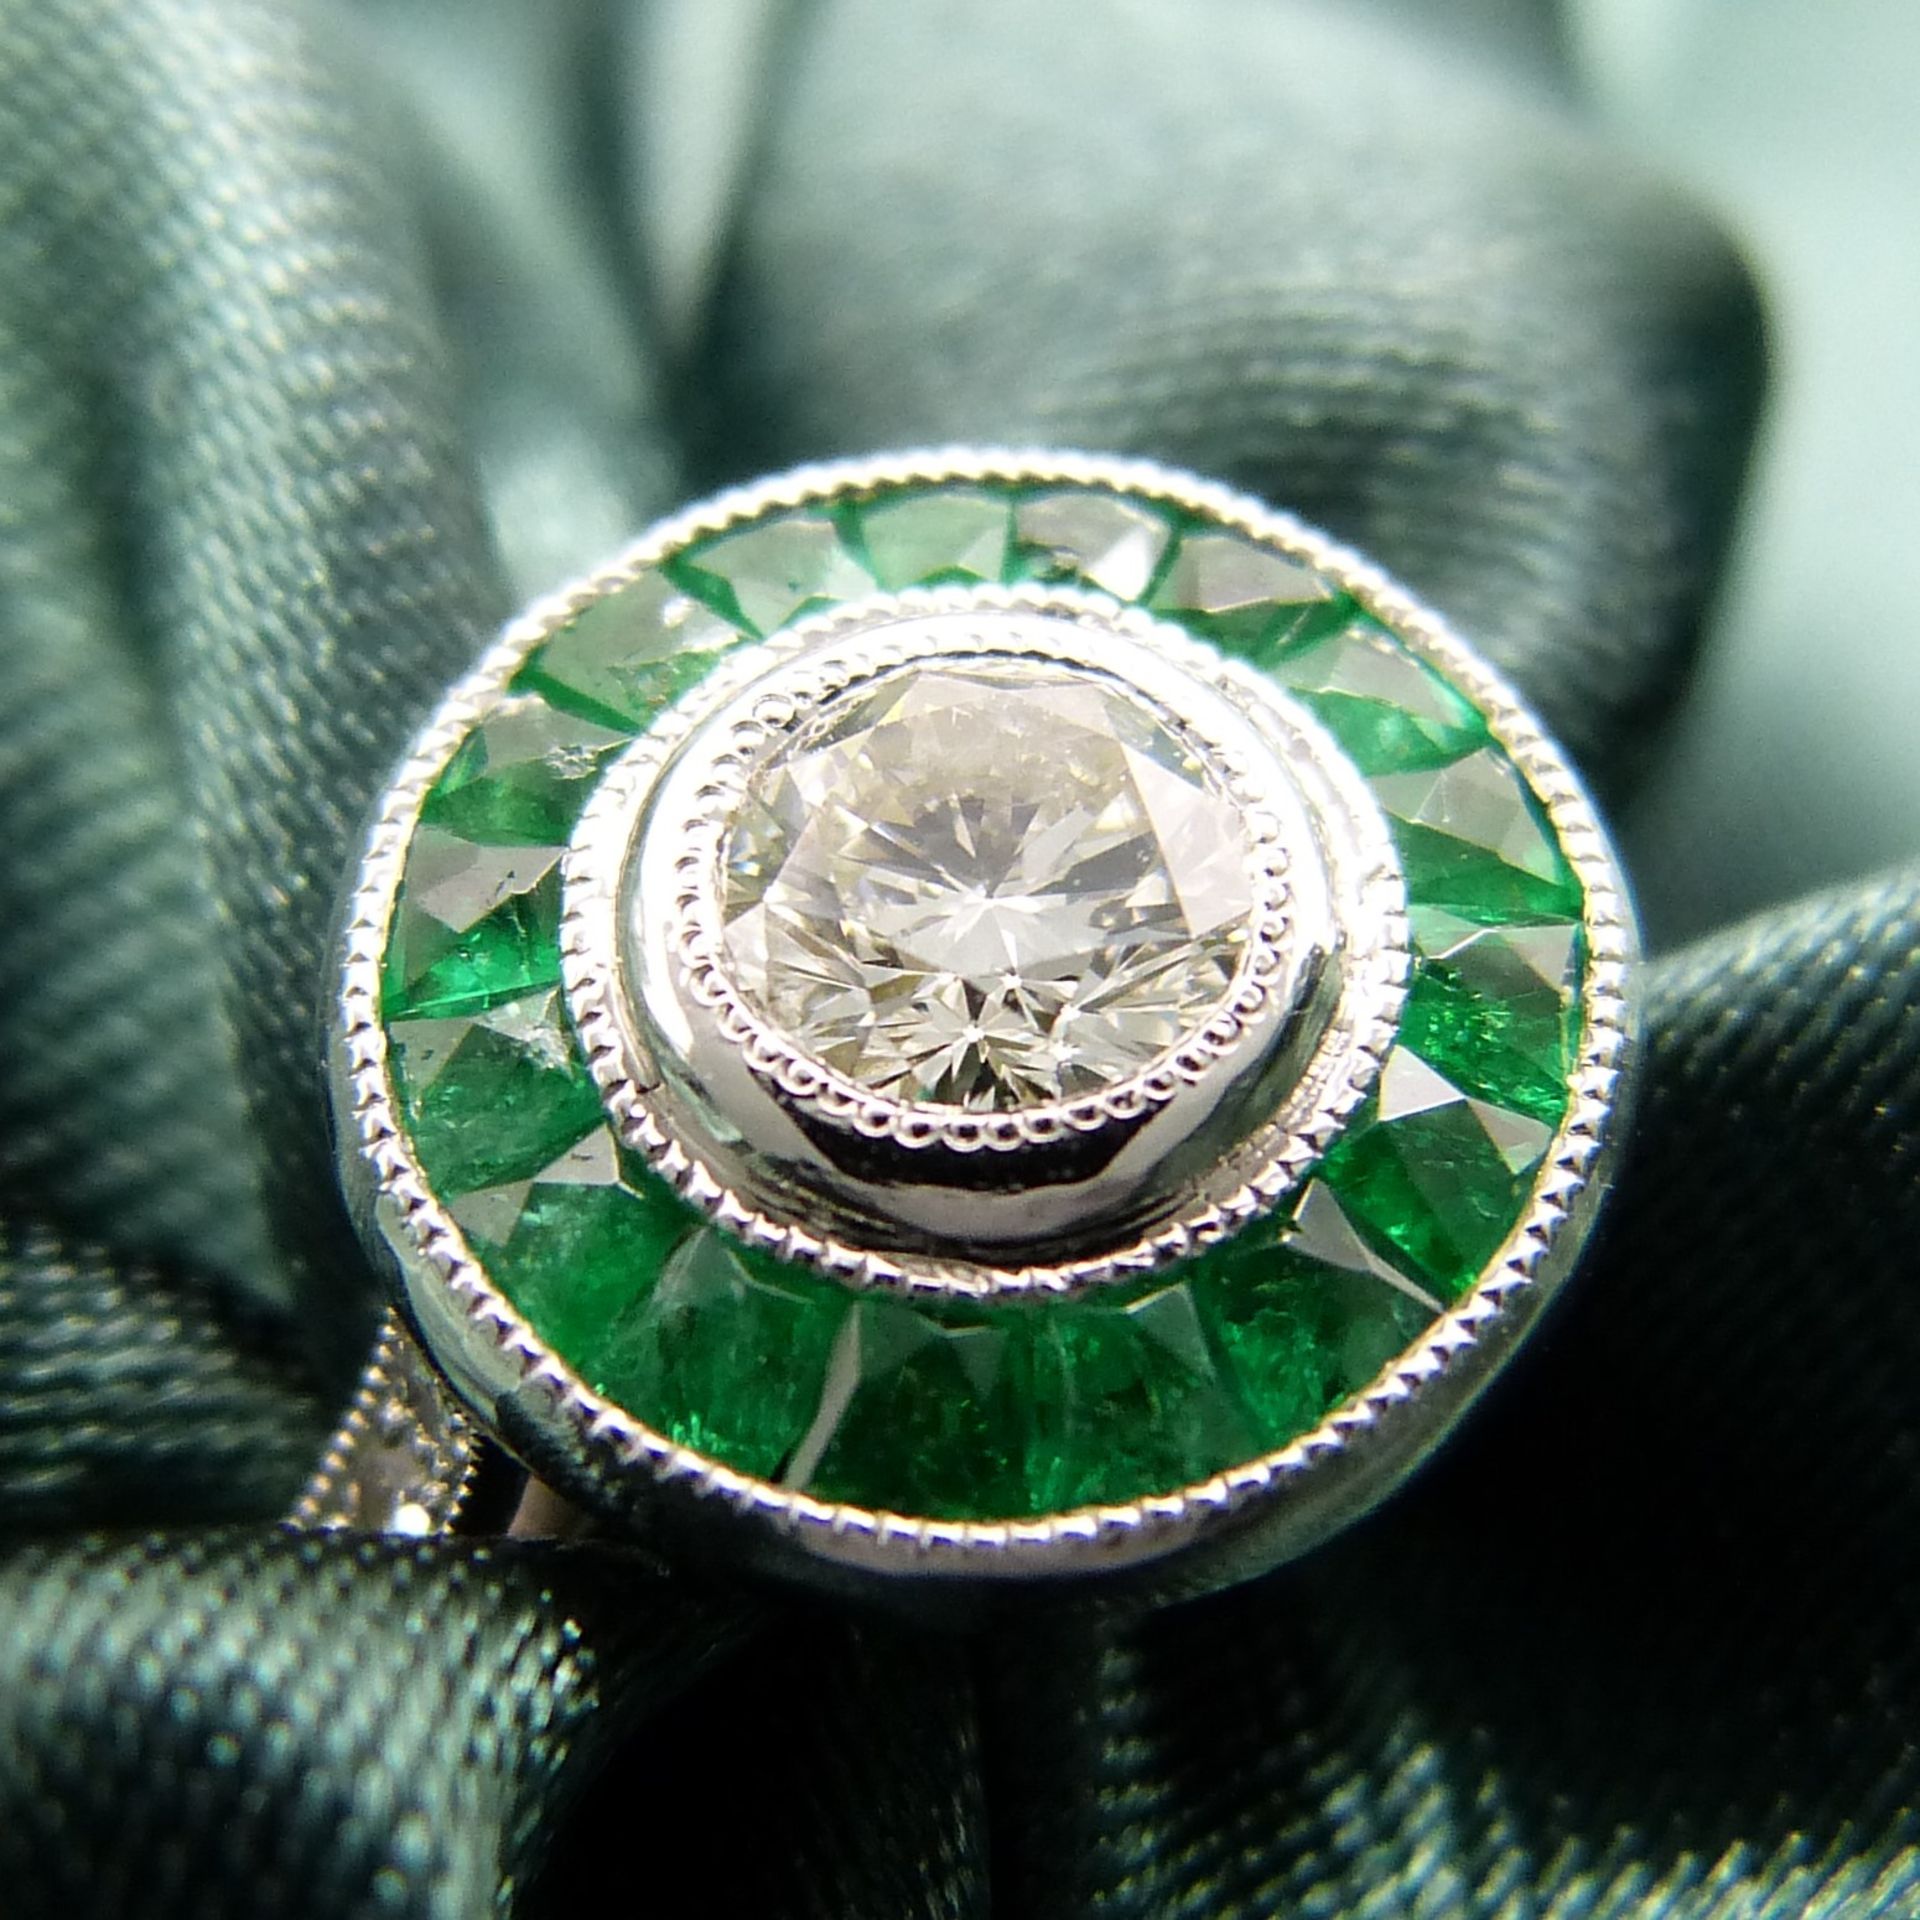 A target-style ring set with round brilliant-cut diamonds and emeralds, platinum - Image 3 of 6